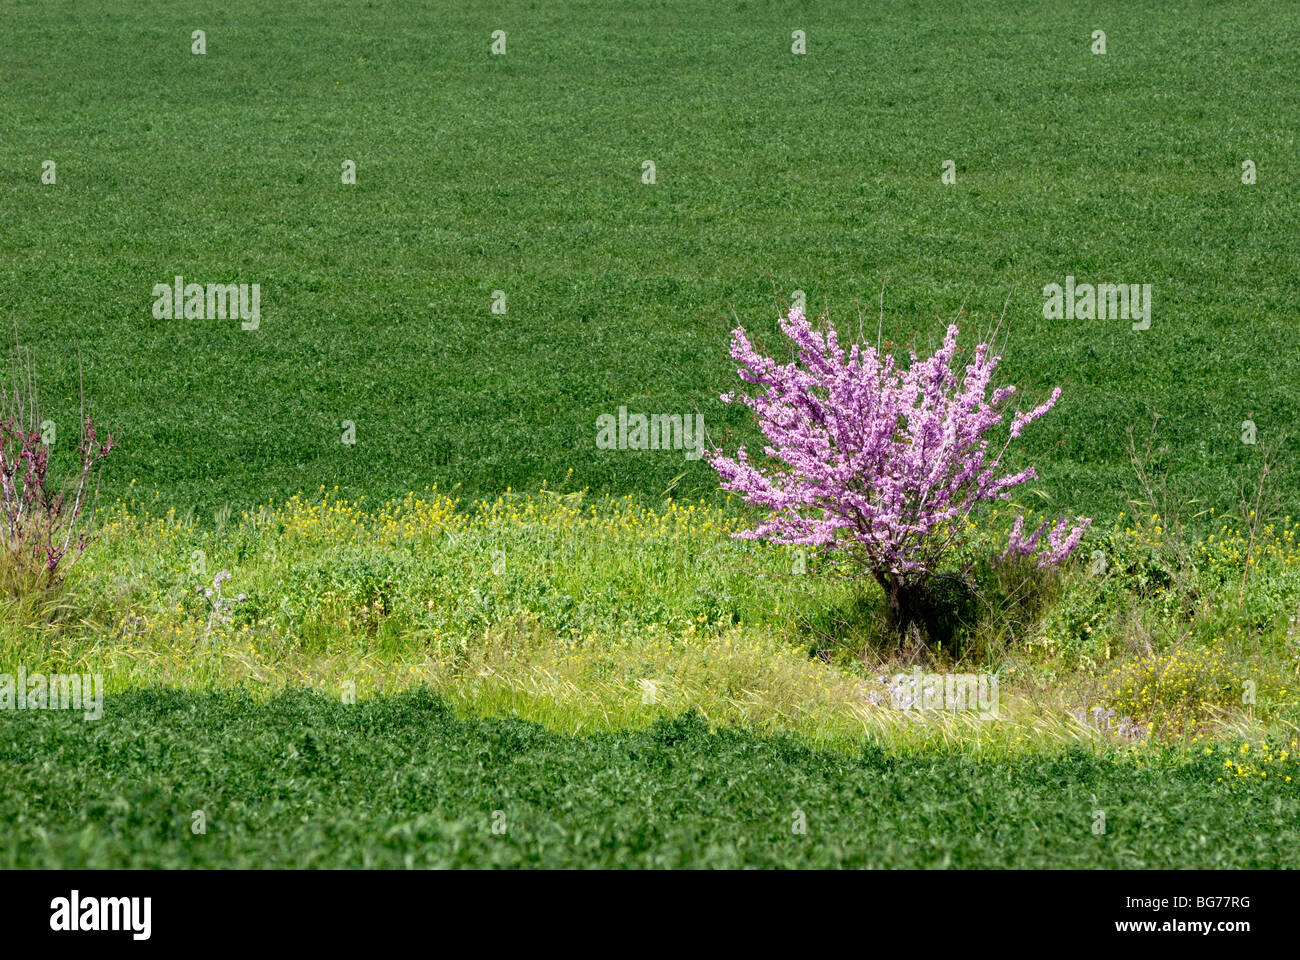 Israel, Negev, purple blossoms on a lone tree in a wheat field Stock Photo